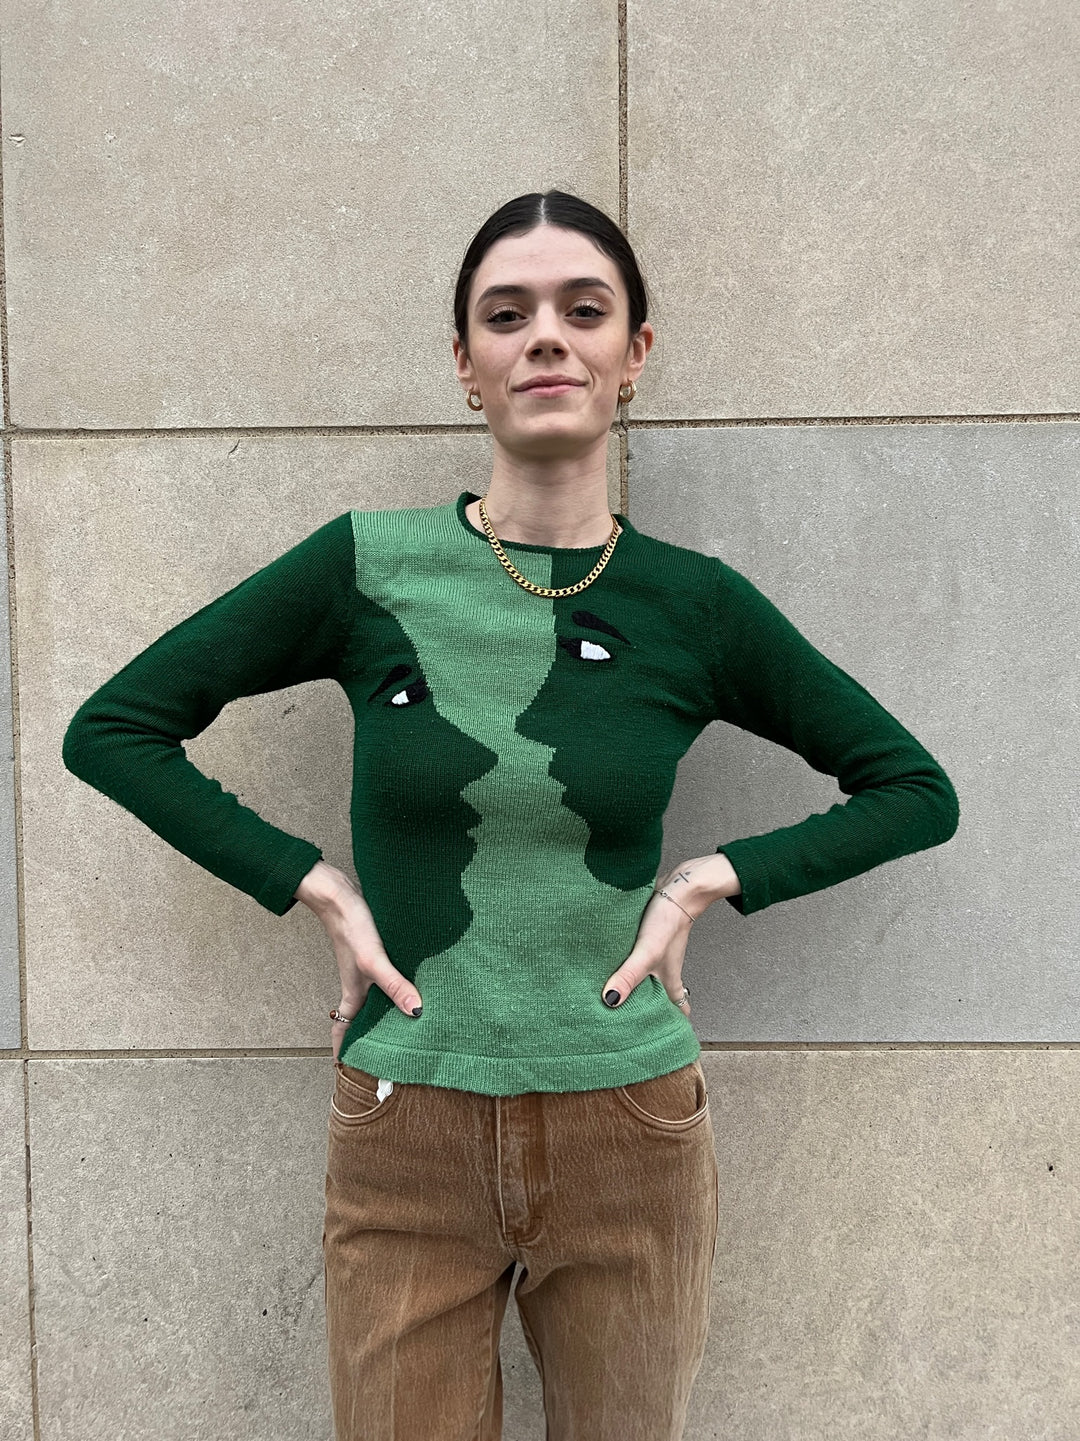 70s 2-Tone Green Acrylic Sweater with 2 Faces, Pronto